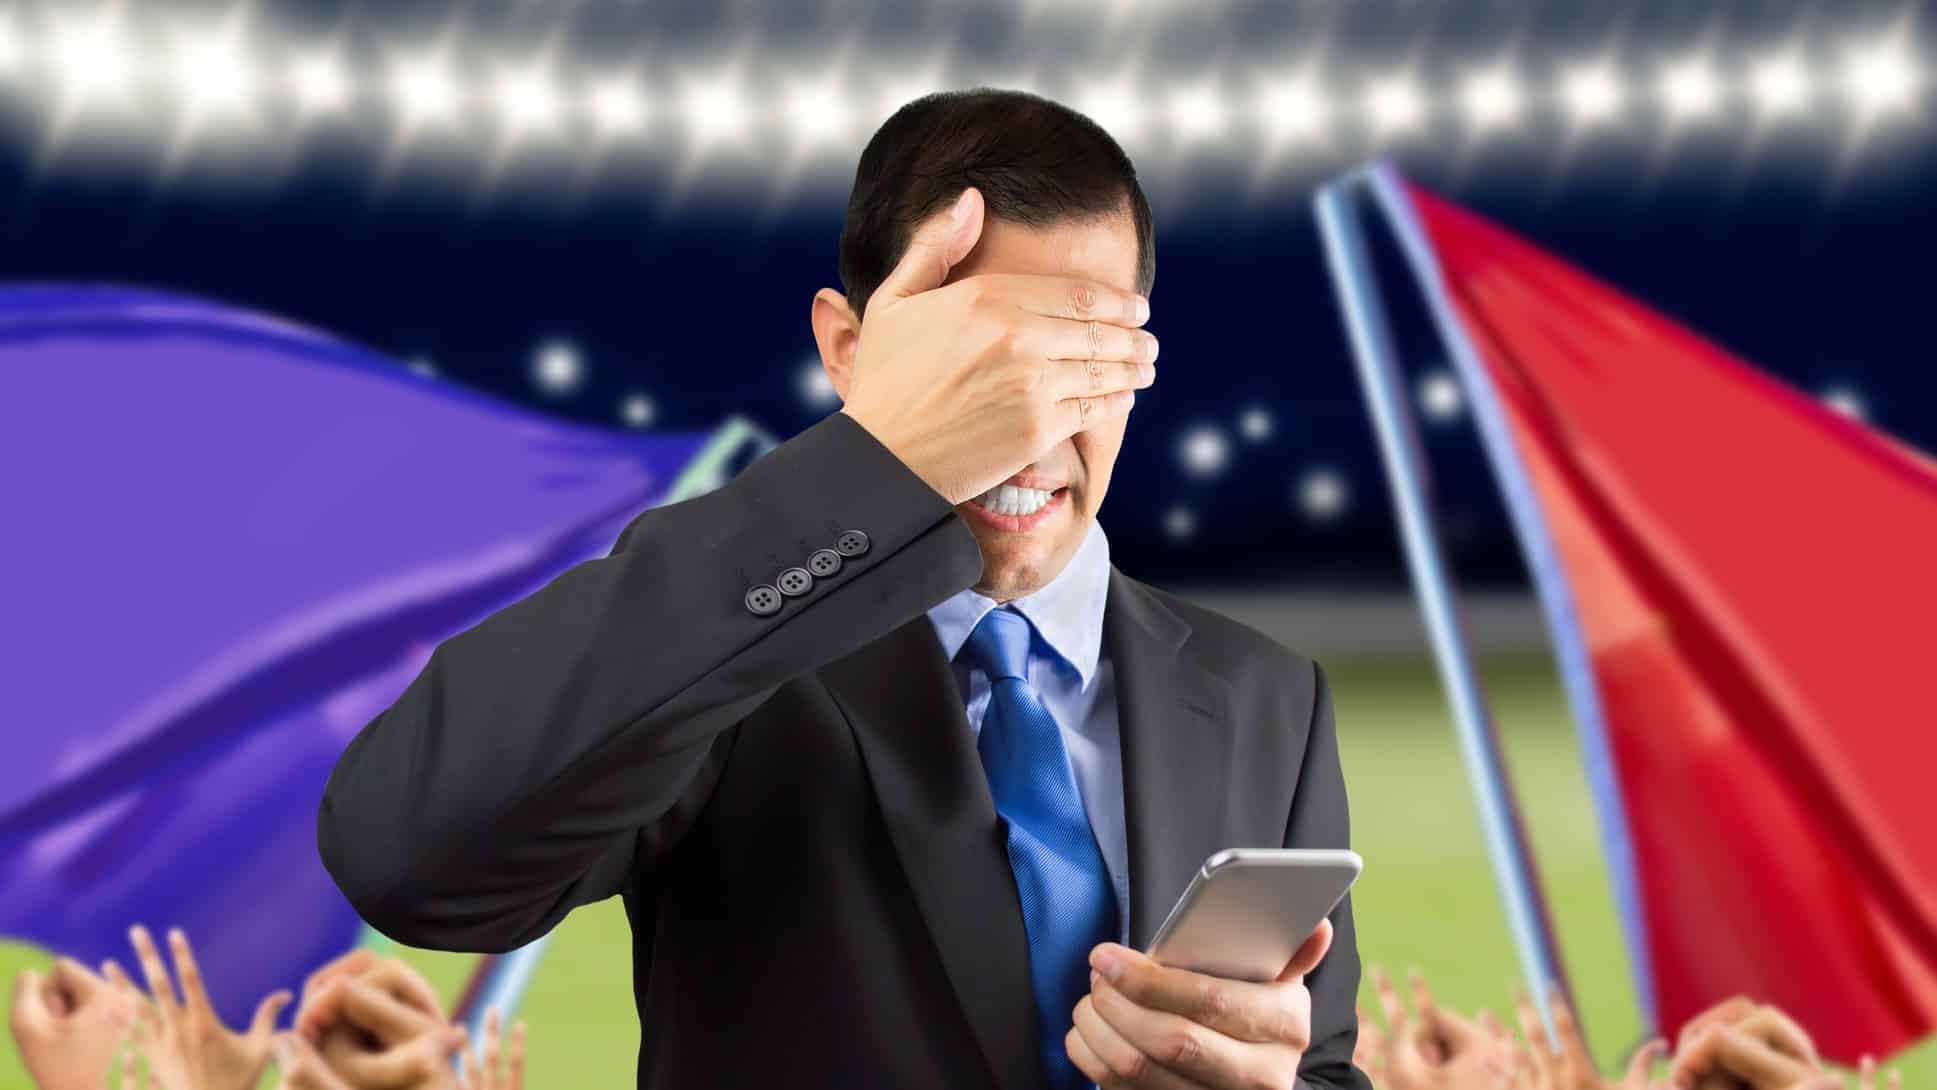 Man puts hand over face as he loses online bet at stadium with flags behind him